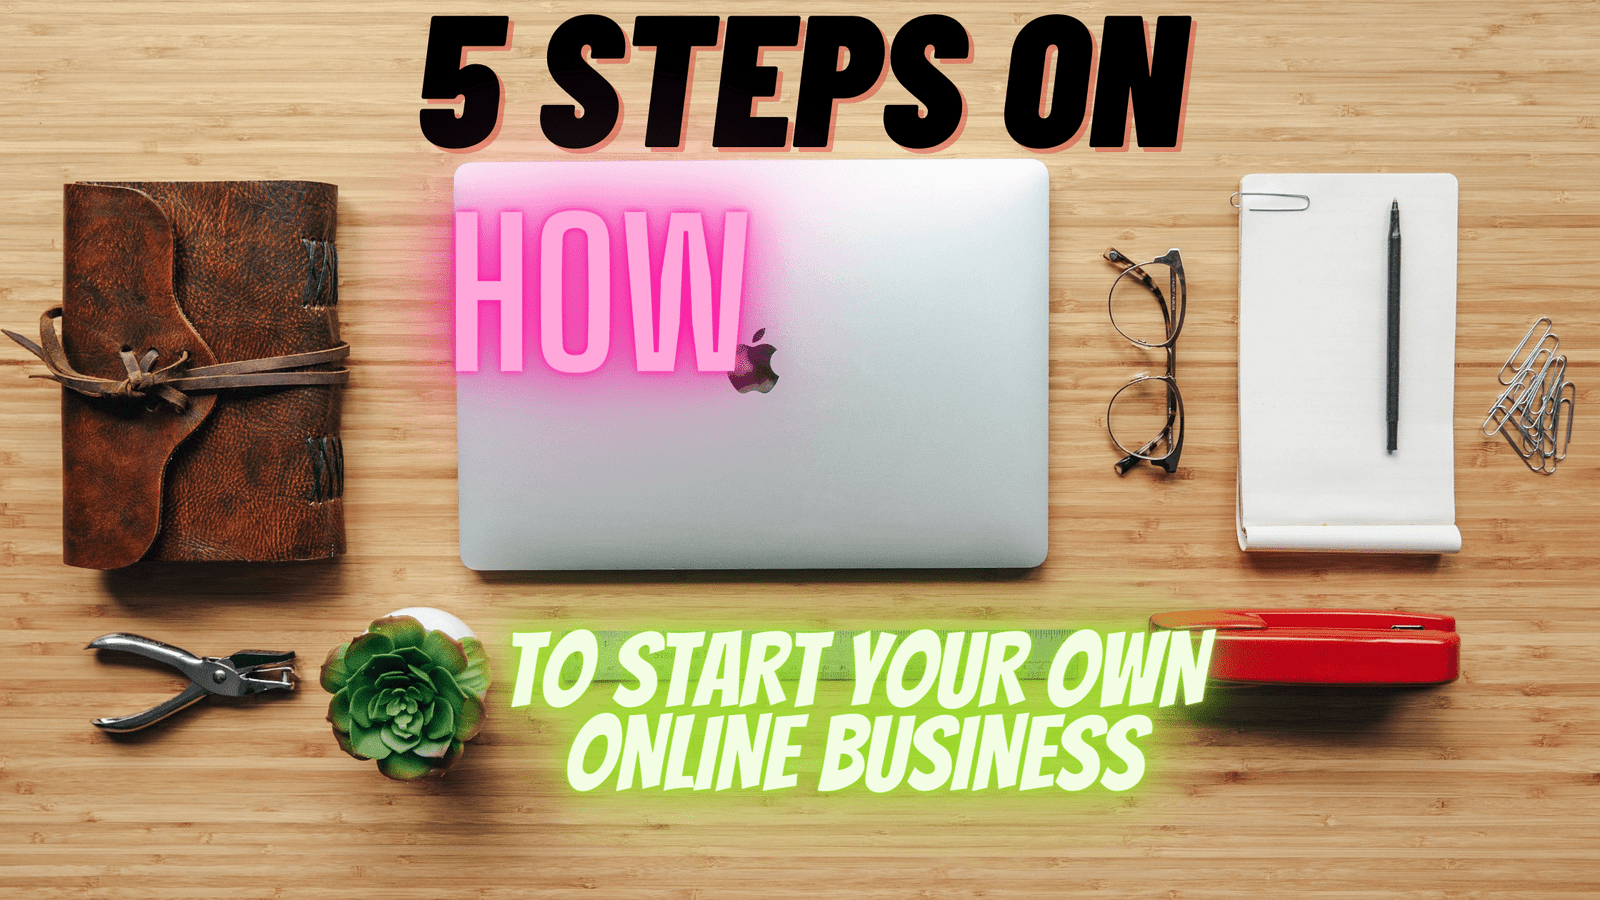 You are currently viewing 5 STEPS ON HOW TO START YOUR OWN ONLINE BUSINESS